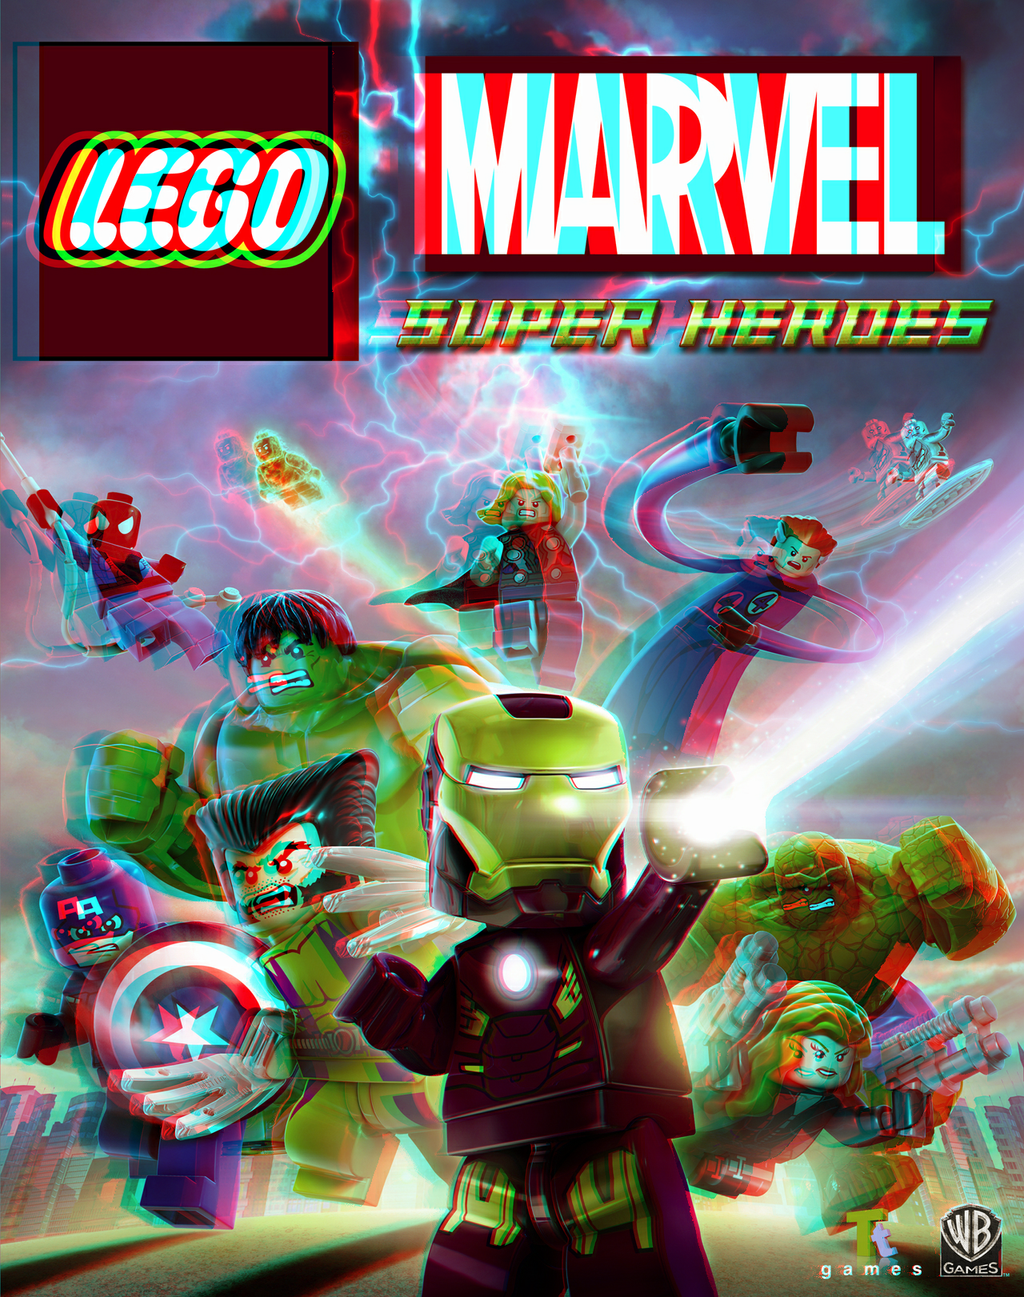 Lego Marvel Super Heroes in 3D Anaglyph